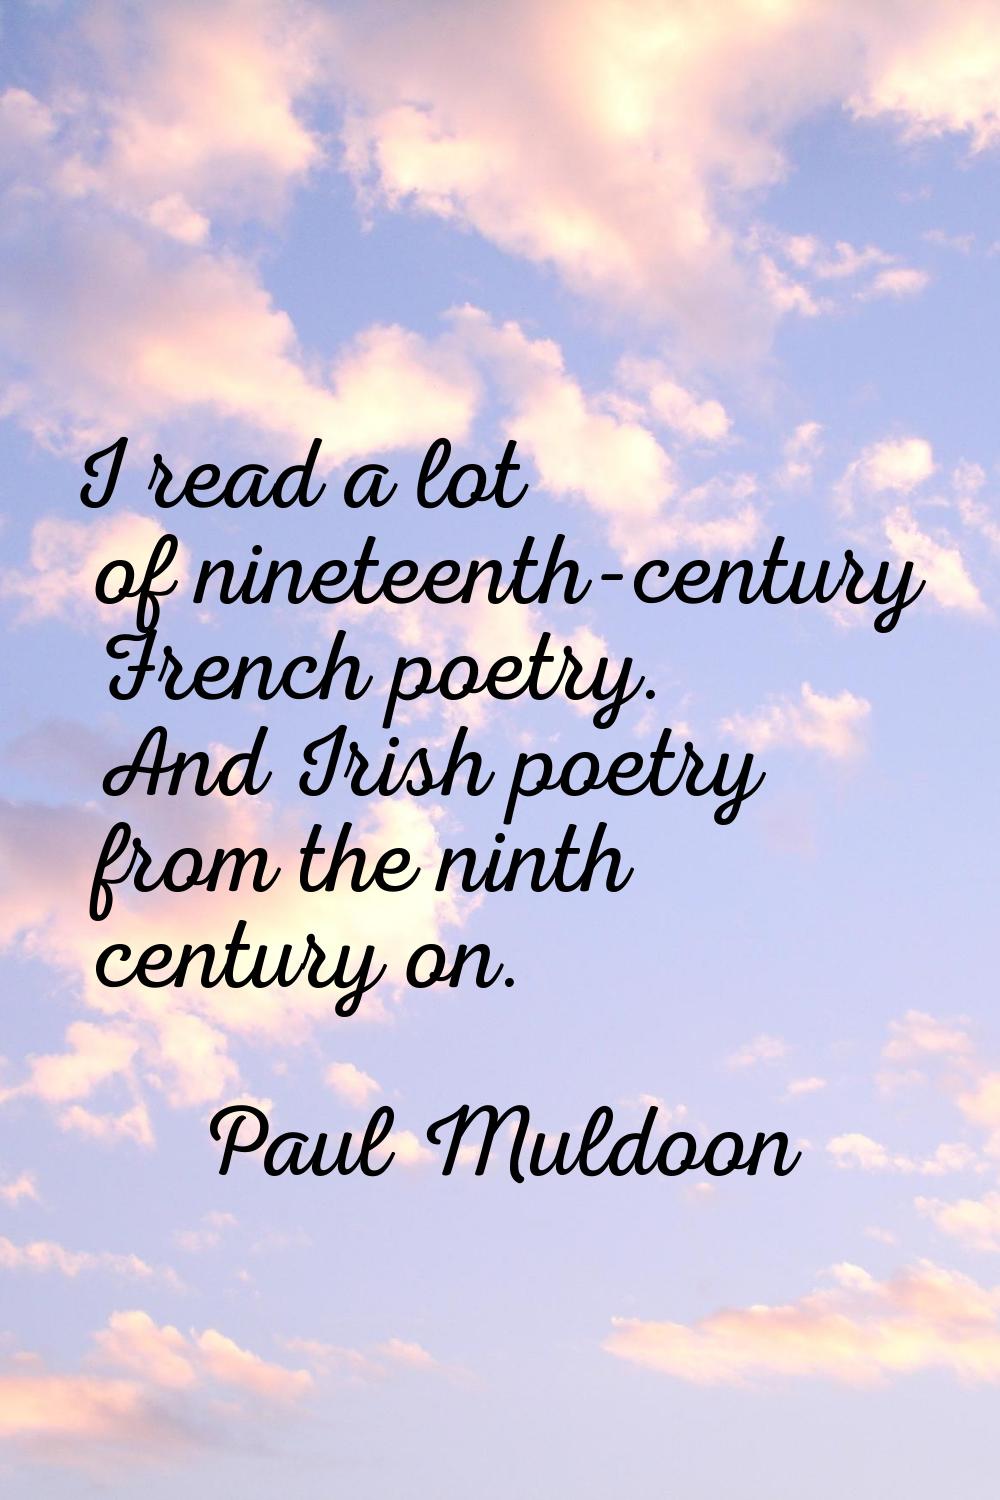 I read a lot of nineteenth-century French poetry. And Irish poetry from the ninth century on.